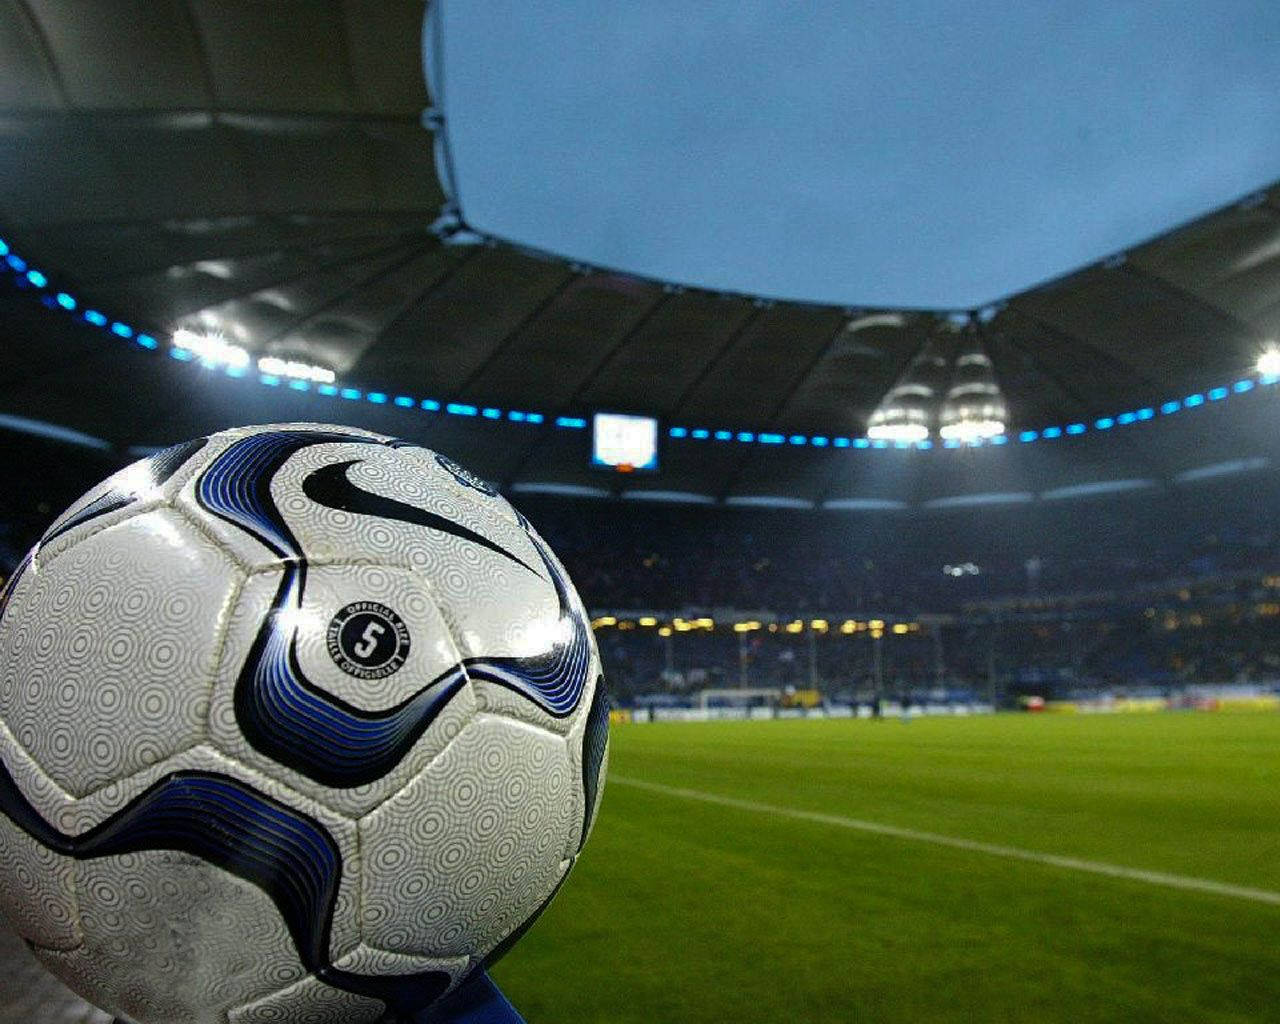 Let's Score Goals With This Soccer Ball Wallpaper